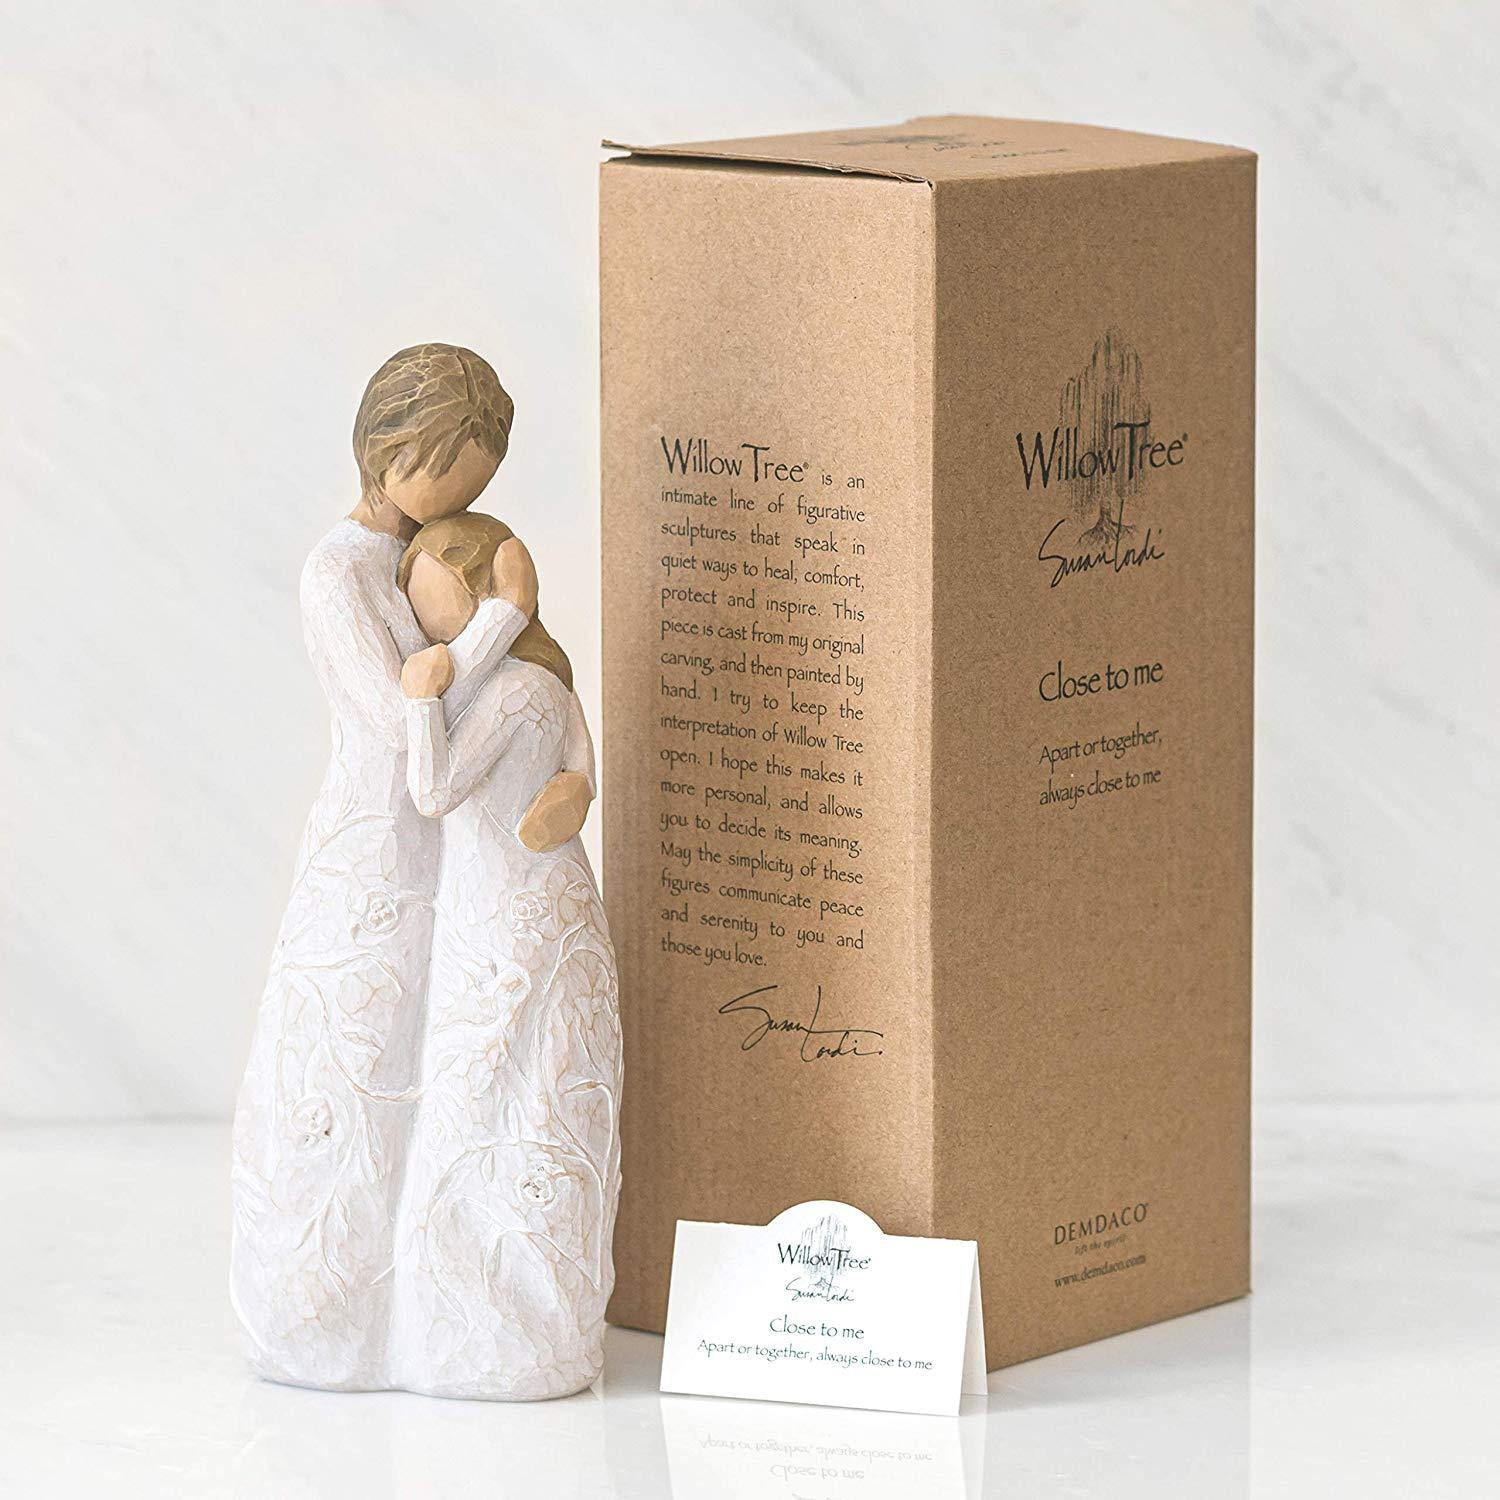 Mother of the Bride Gifts Sculpted Hand-Painted Figure - The Dress Outlet MOB